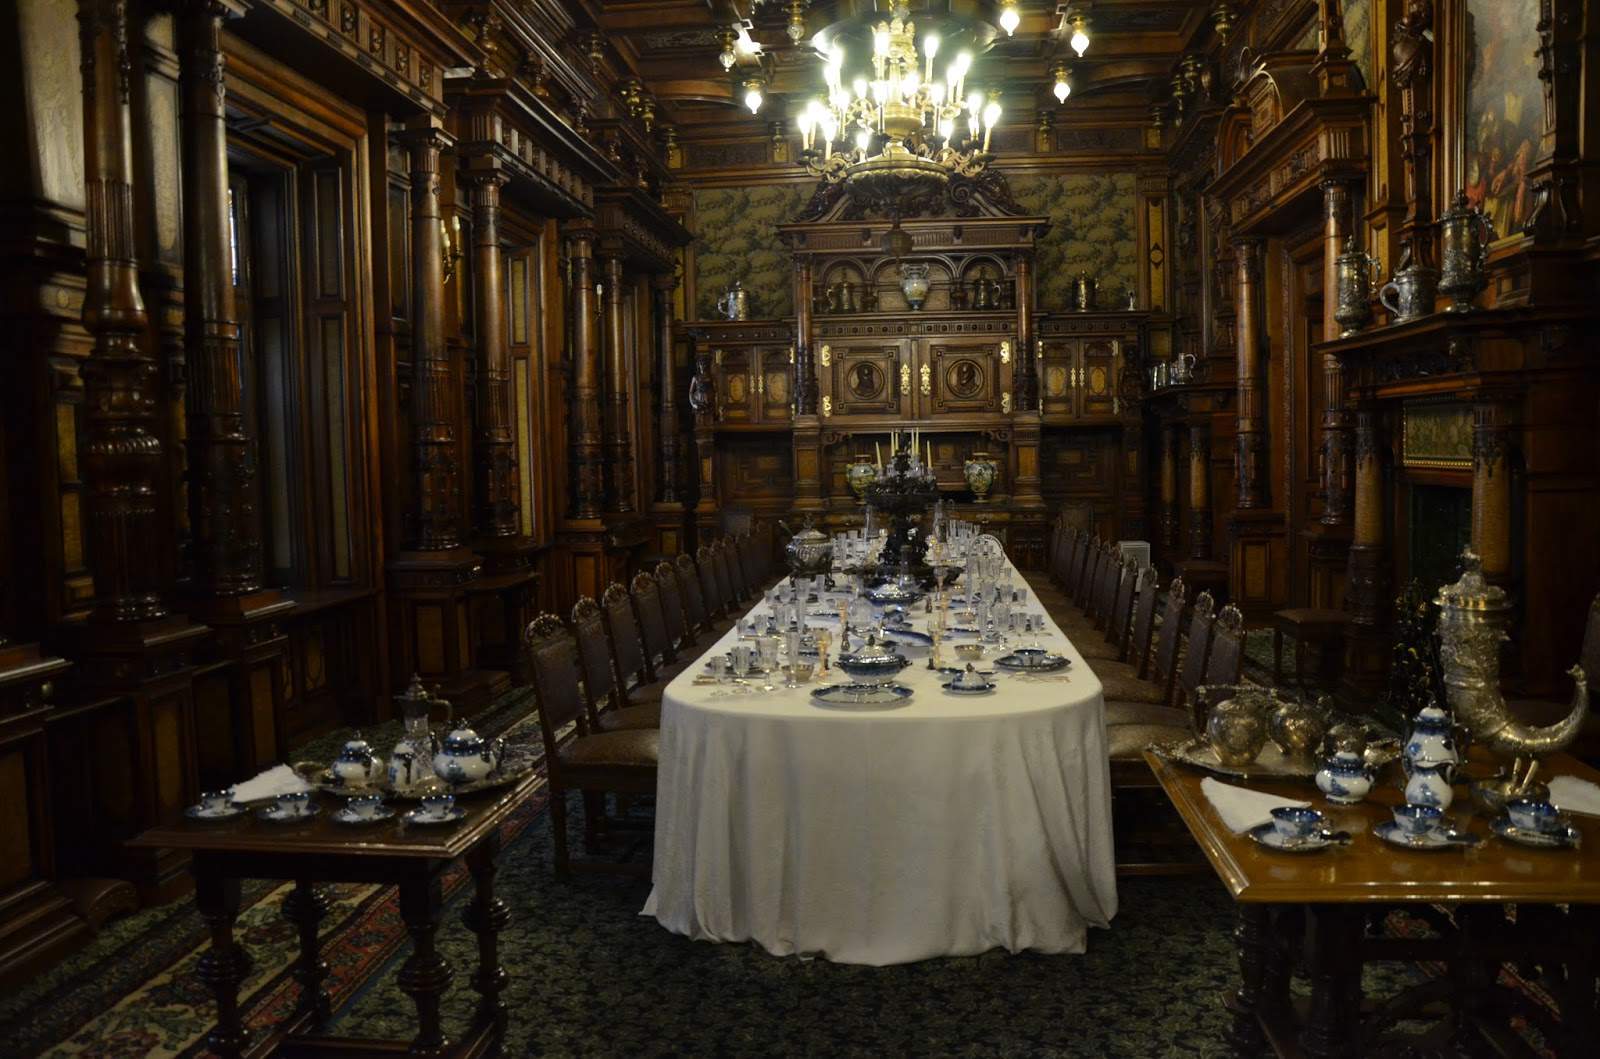 Dining room at Peleș Castle in Sinaia, Romania